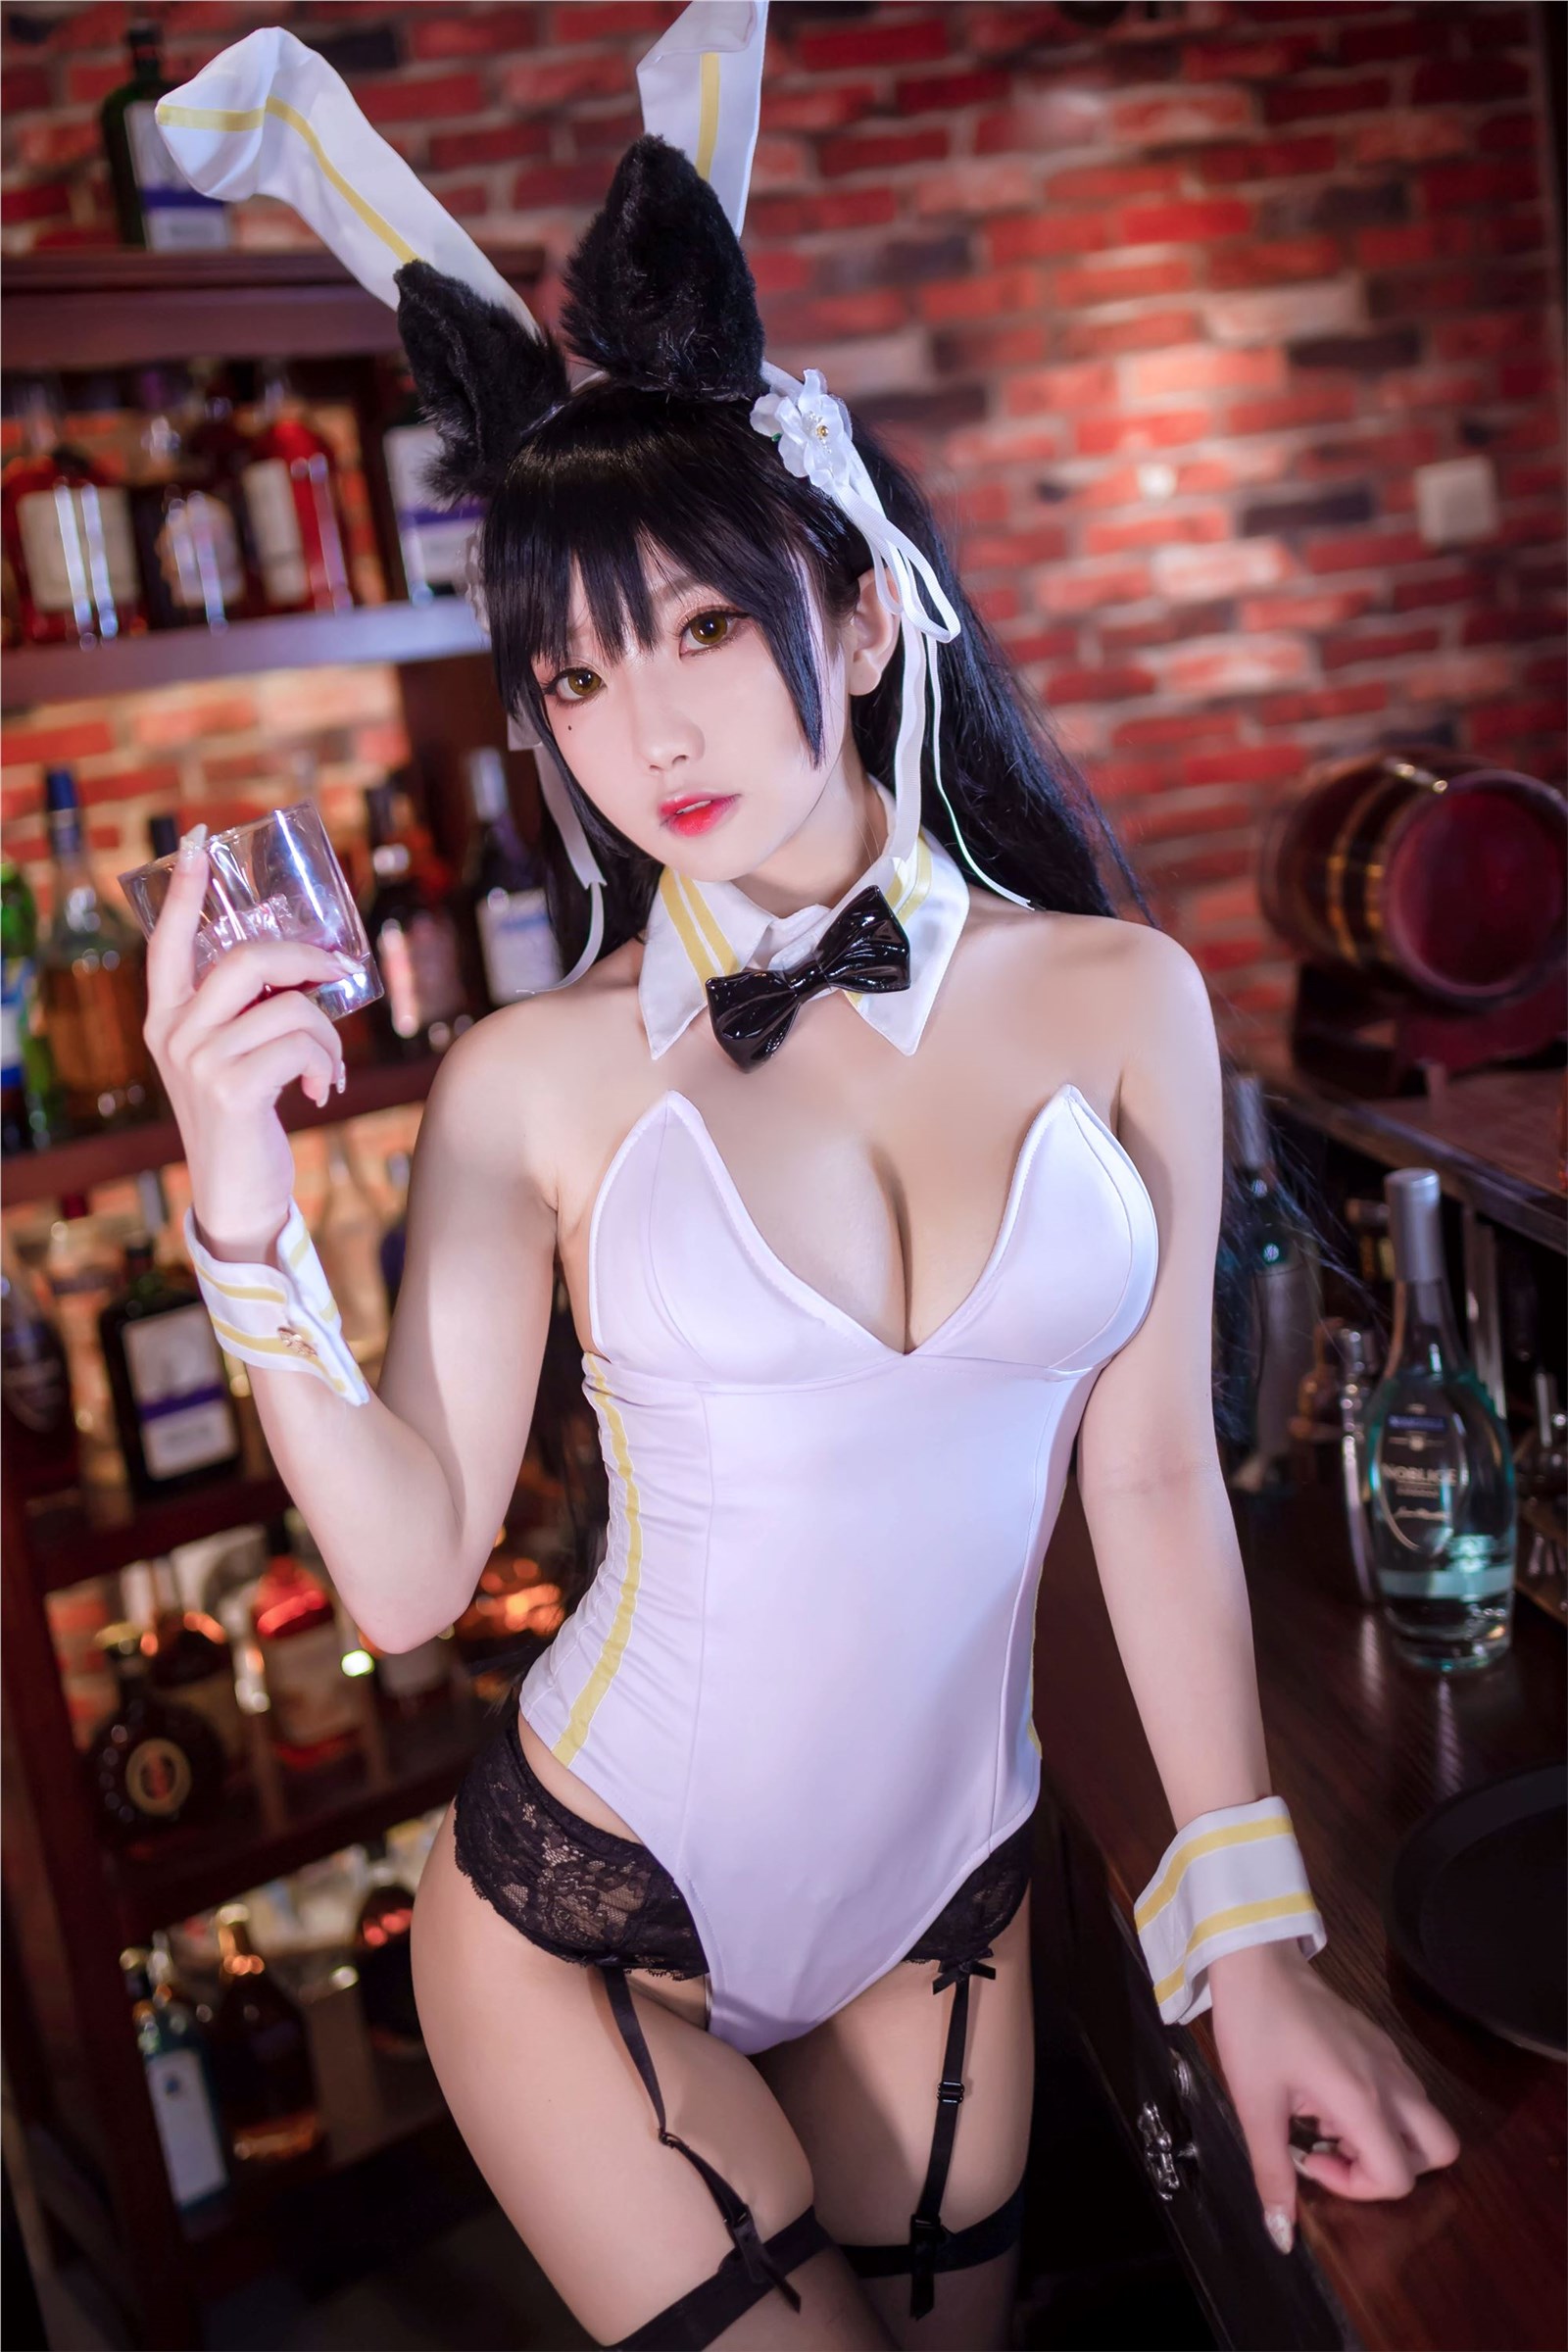 Cosplay is Yao in or not - bar Bunny(1)